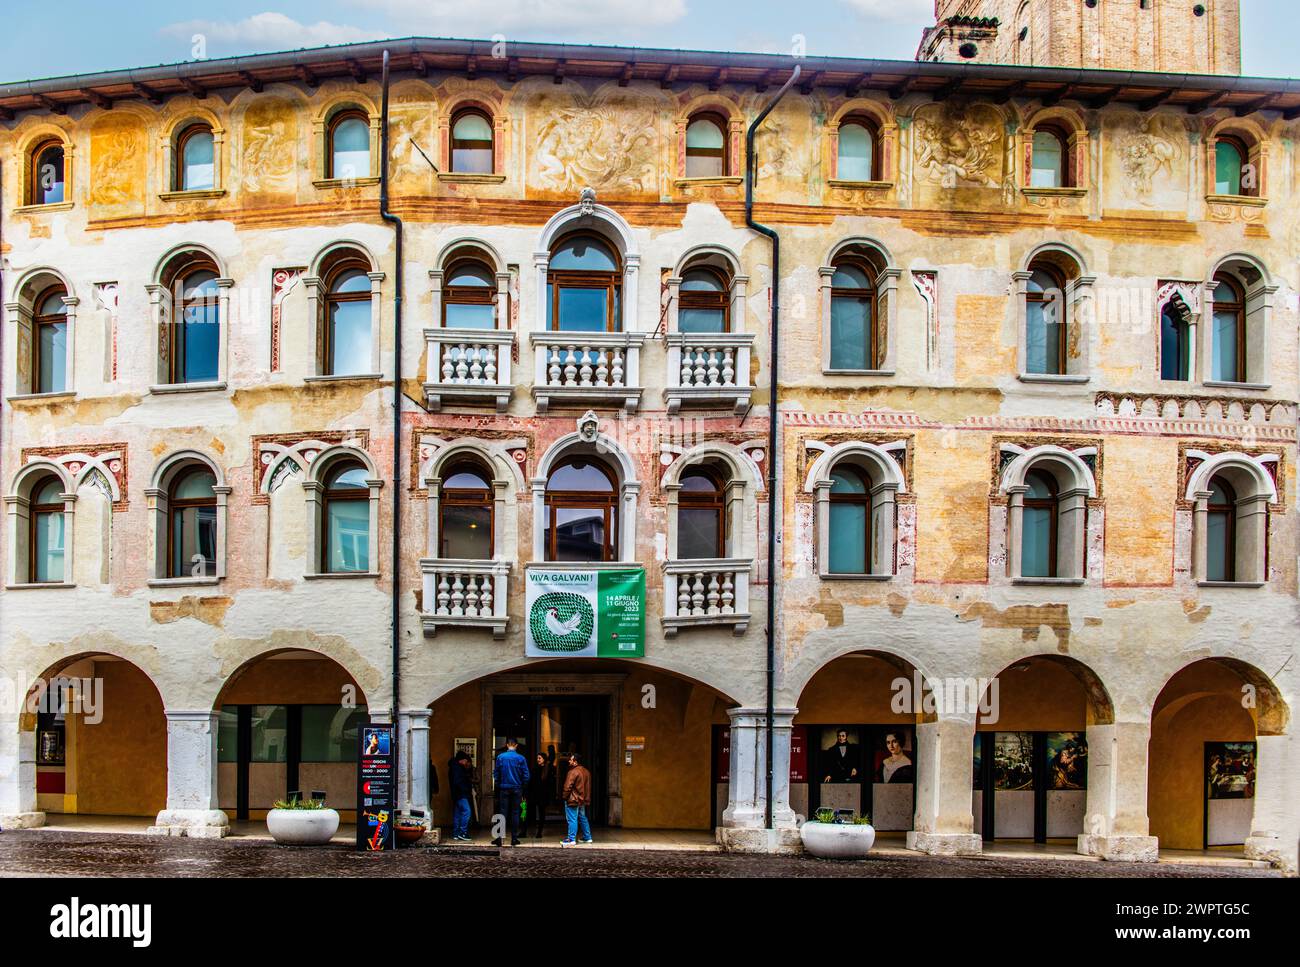 Museo Civico d'Arte, Palzuo Ricchieri, old town centre with magnificent aristocratic palaces and Venetian-style arcades, Pordenone, Friuli, Italy Stock Photo